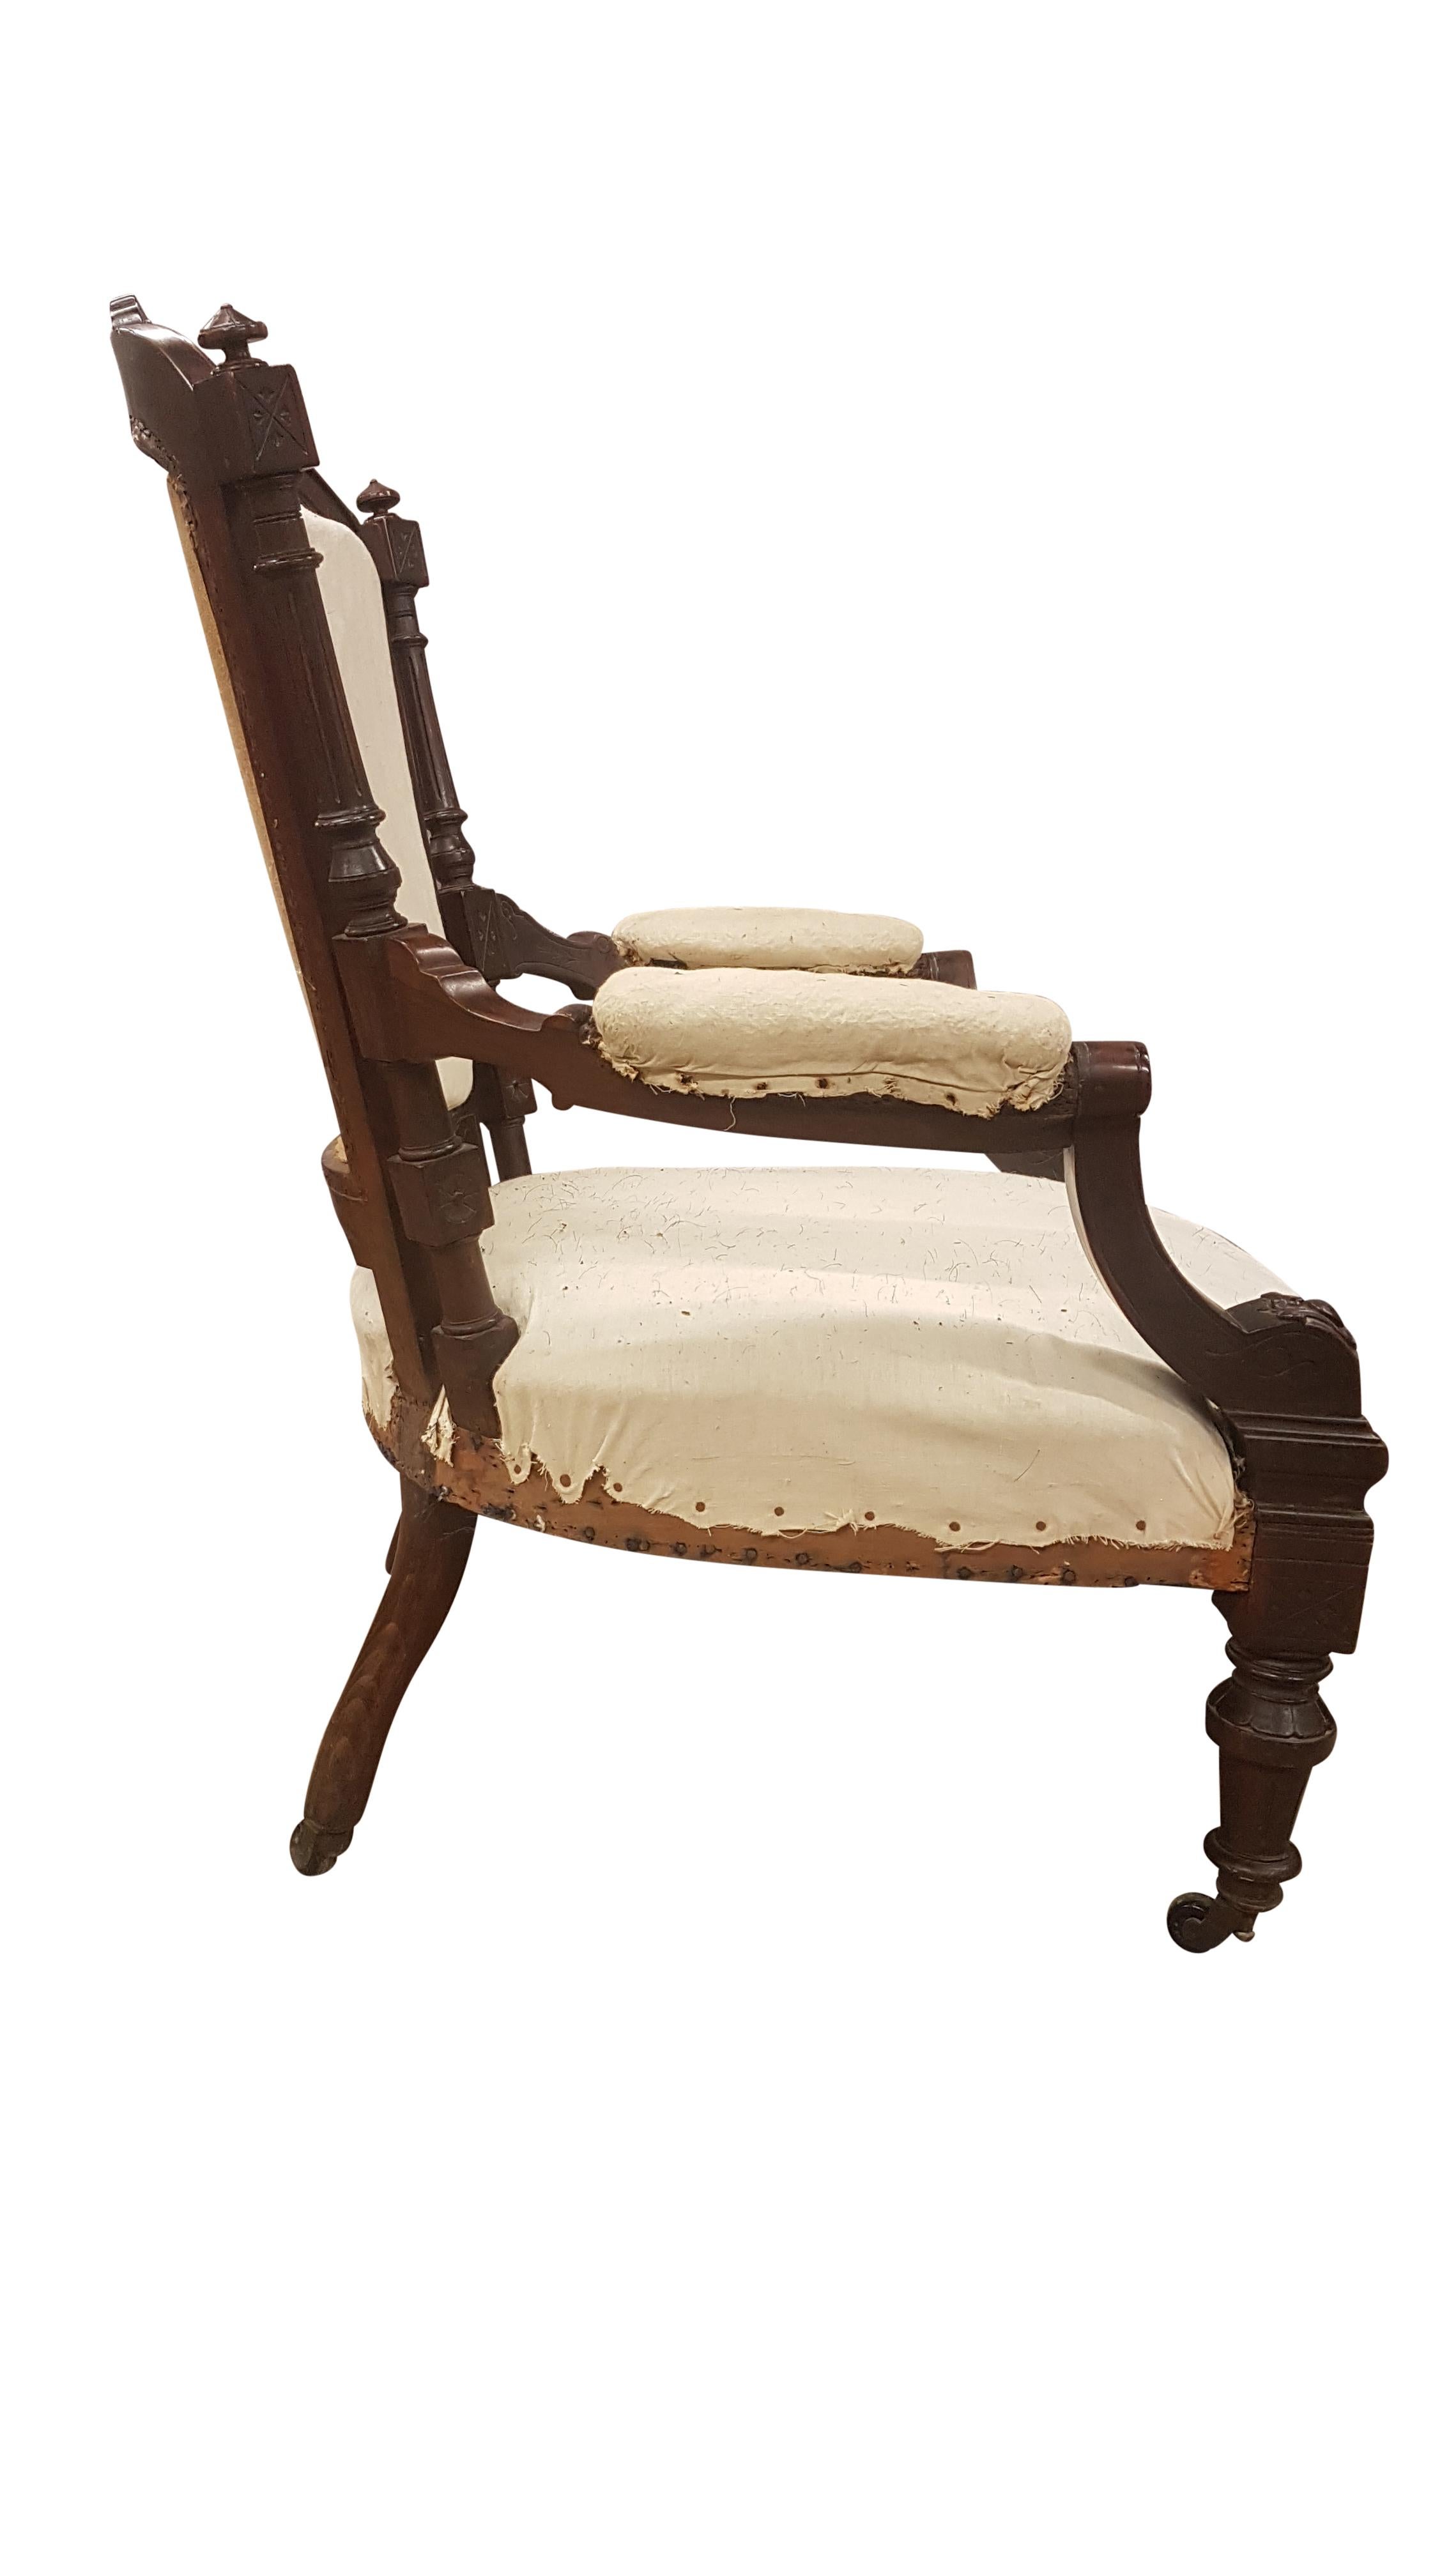 An ornately carved and turned solid rosewood open armchair with an unusually wide seat. The chair has had the upholstery taken back to it's calico lining, all springs and padding are in very good order and ready for recovering. The rosewood carvings